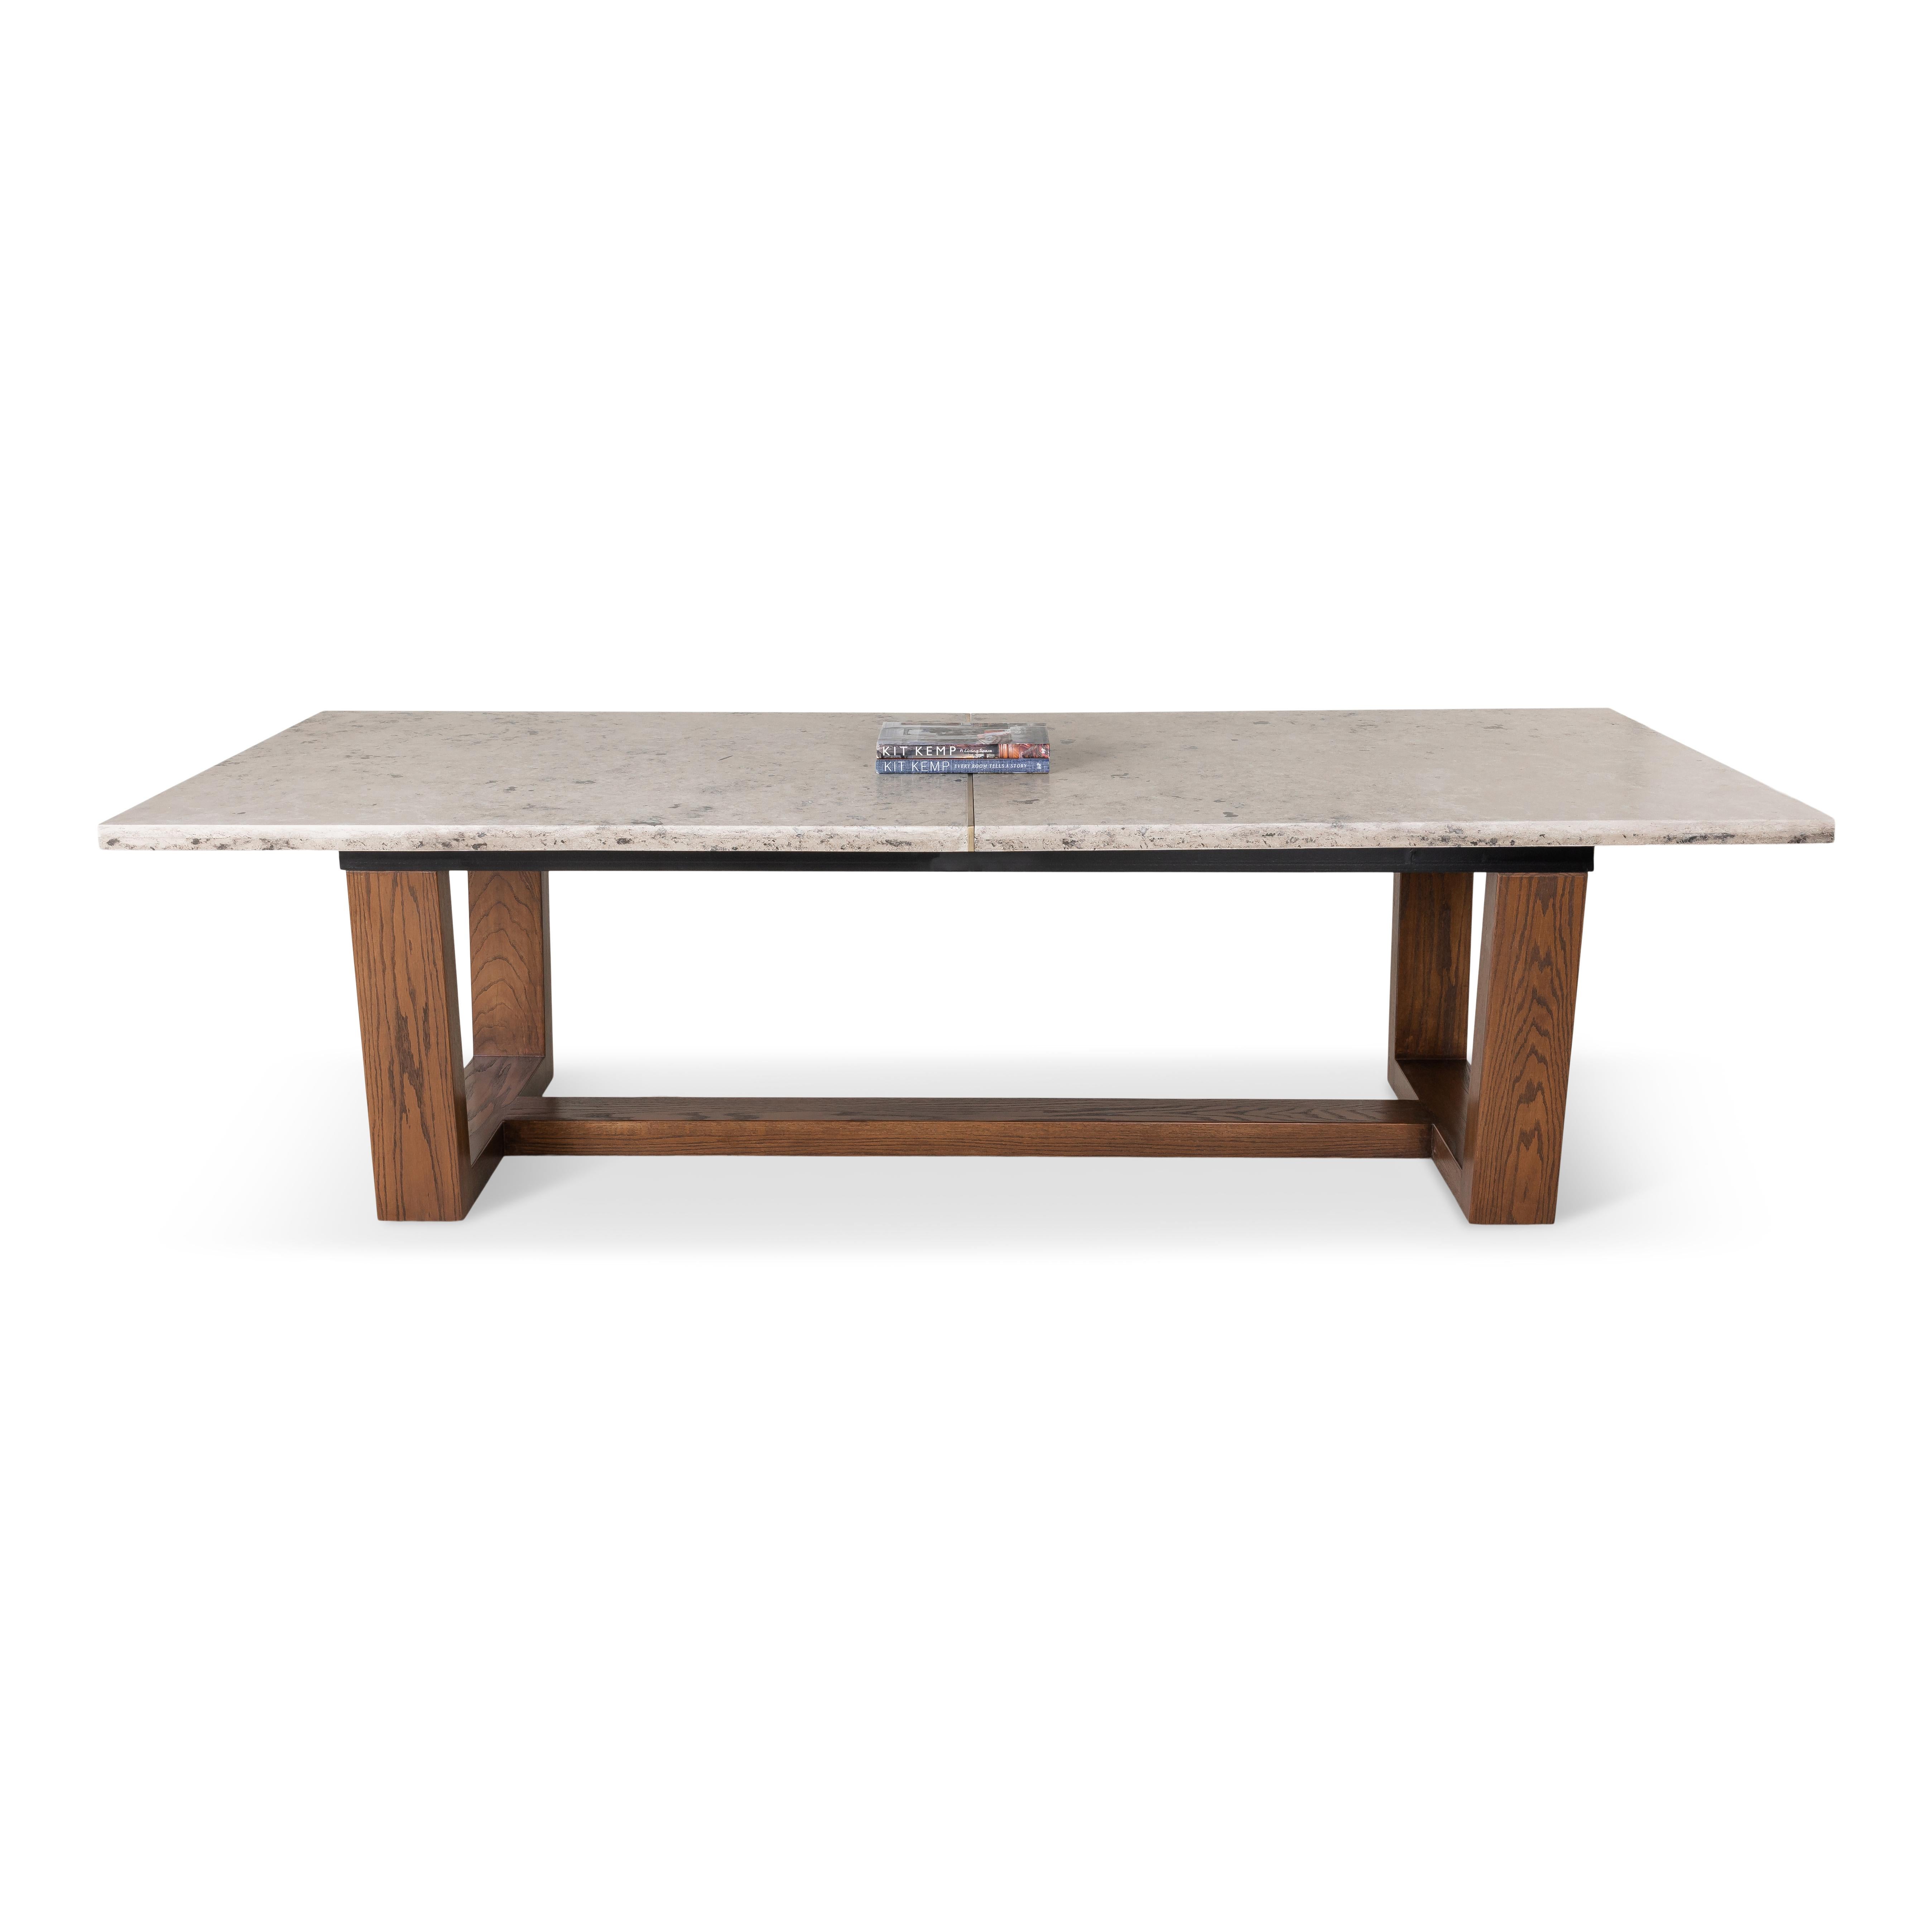 Dining table with jura grey marble top on walnut base with bronze band. 

Dimensions, stone type and metal finish can be customized.
This item is custom and will have a 10 week lead time.